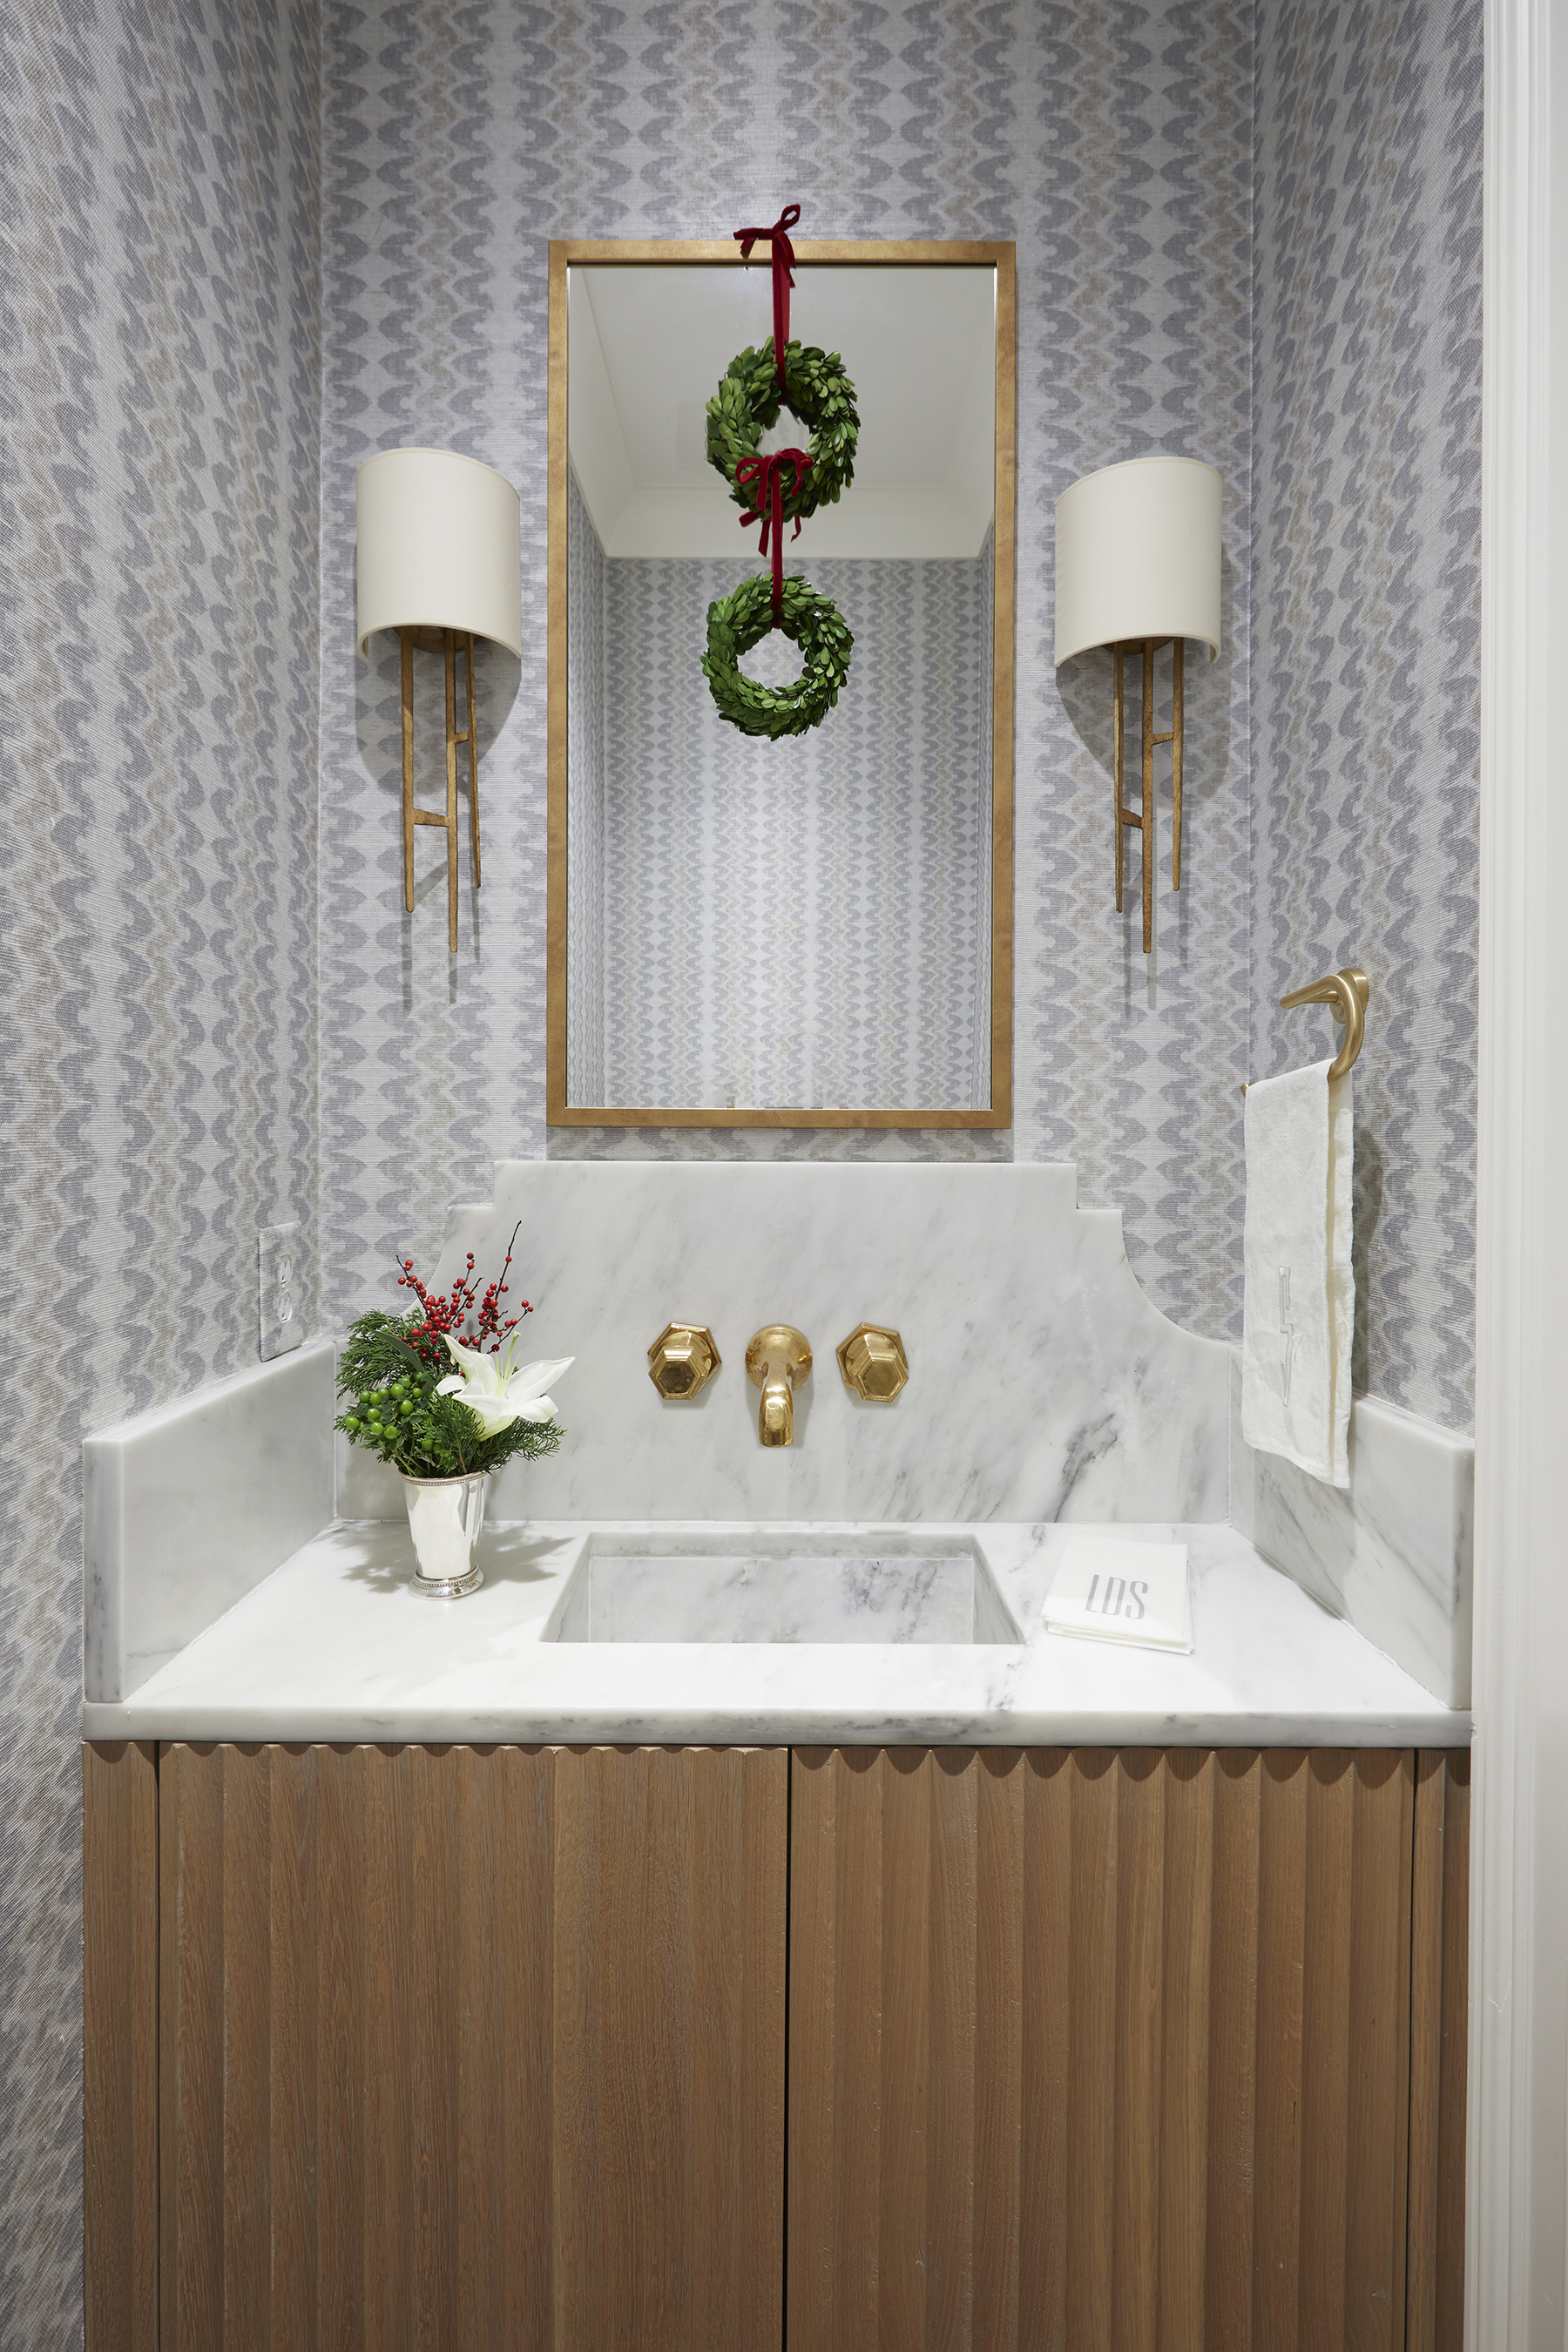 Cowtan and Tout wallpaper shines in a guest bathroom. The hammered gold mirror, gold sconces, and gold faucet finish out the jewel box feel.